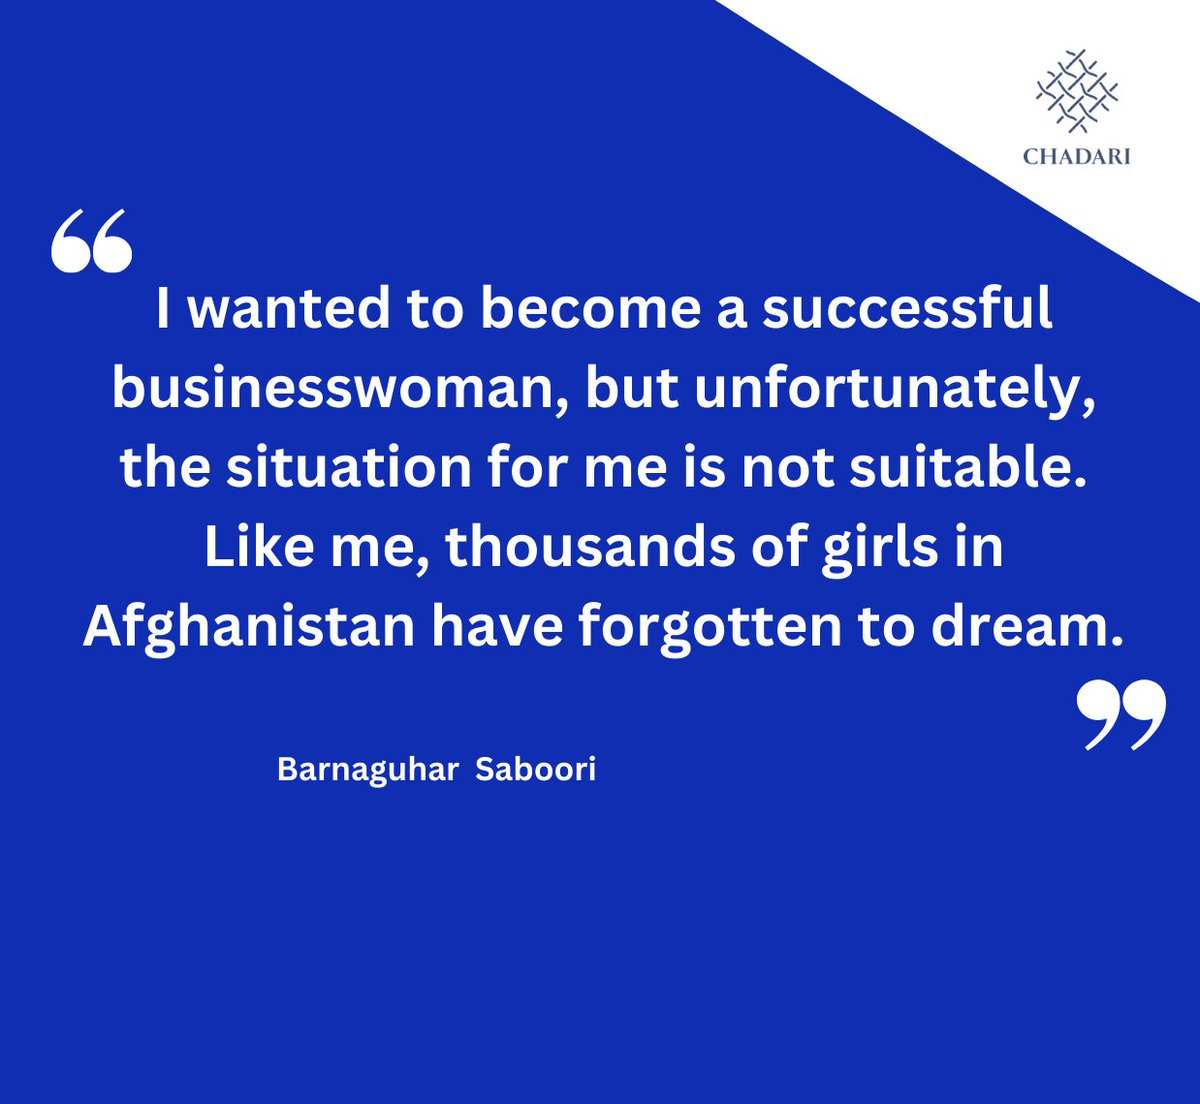 Barnaguhar looks back at the time Taliban shut down her school and reflects on her current situation of living without attending school while concerned for her future. Read her story: linkedin.com/pulse/afghan-g… #LetAfghanGirlsLearn #StandWithAfghanWomen